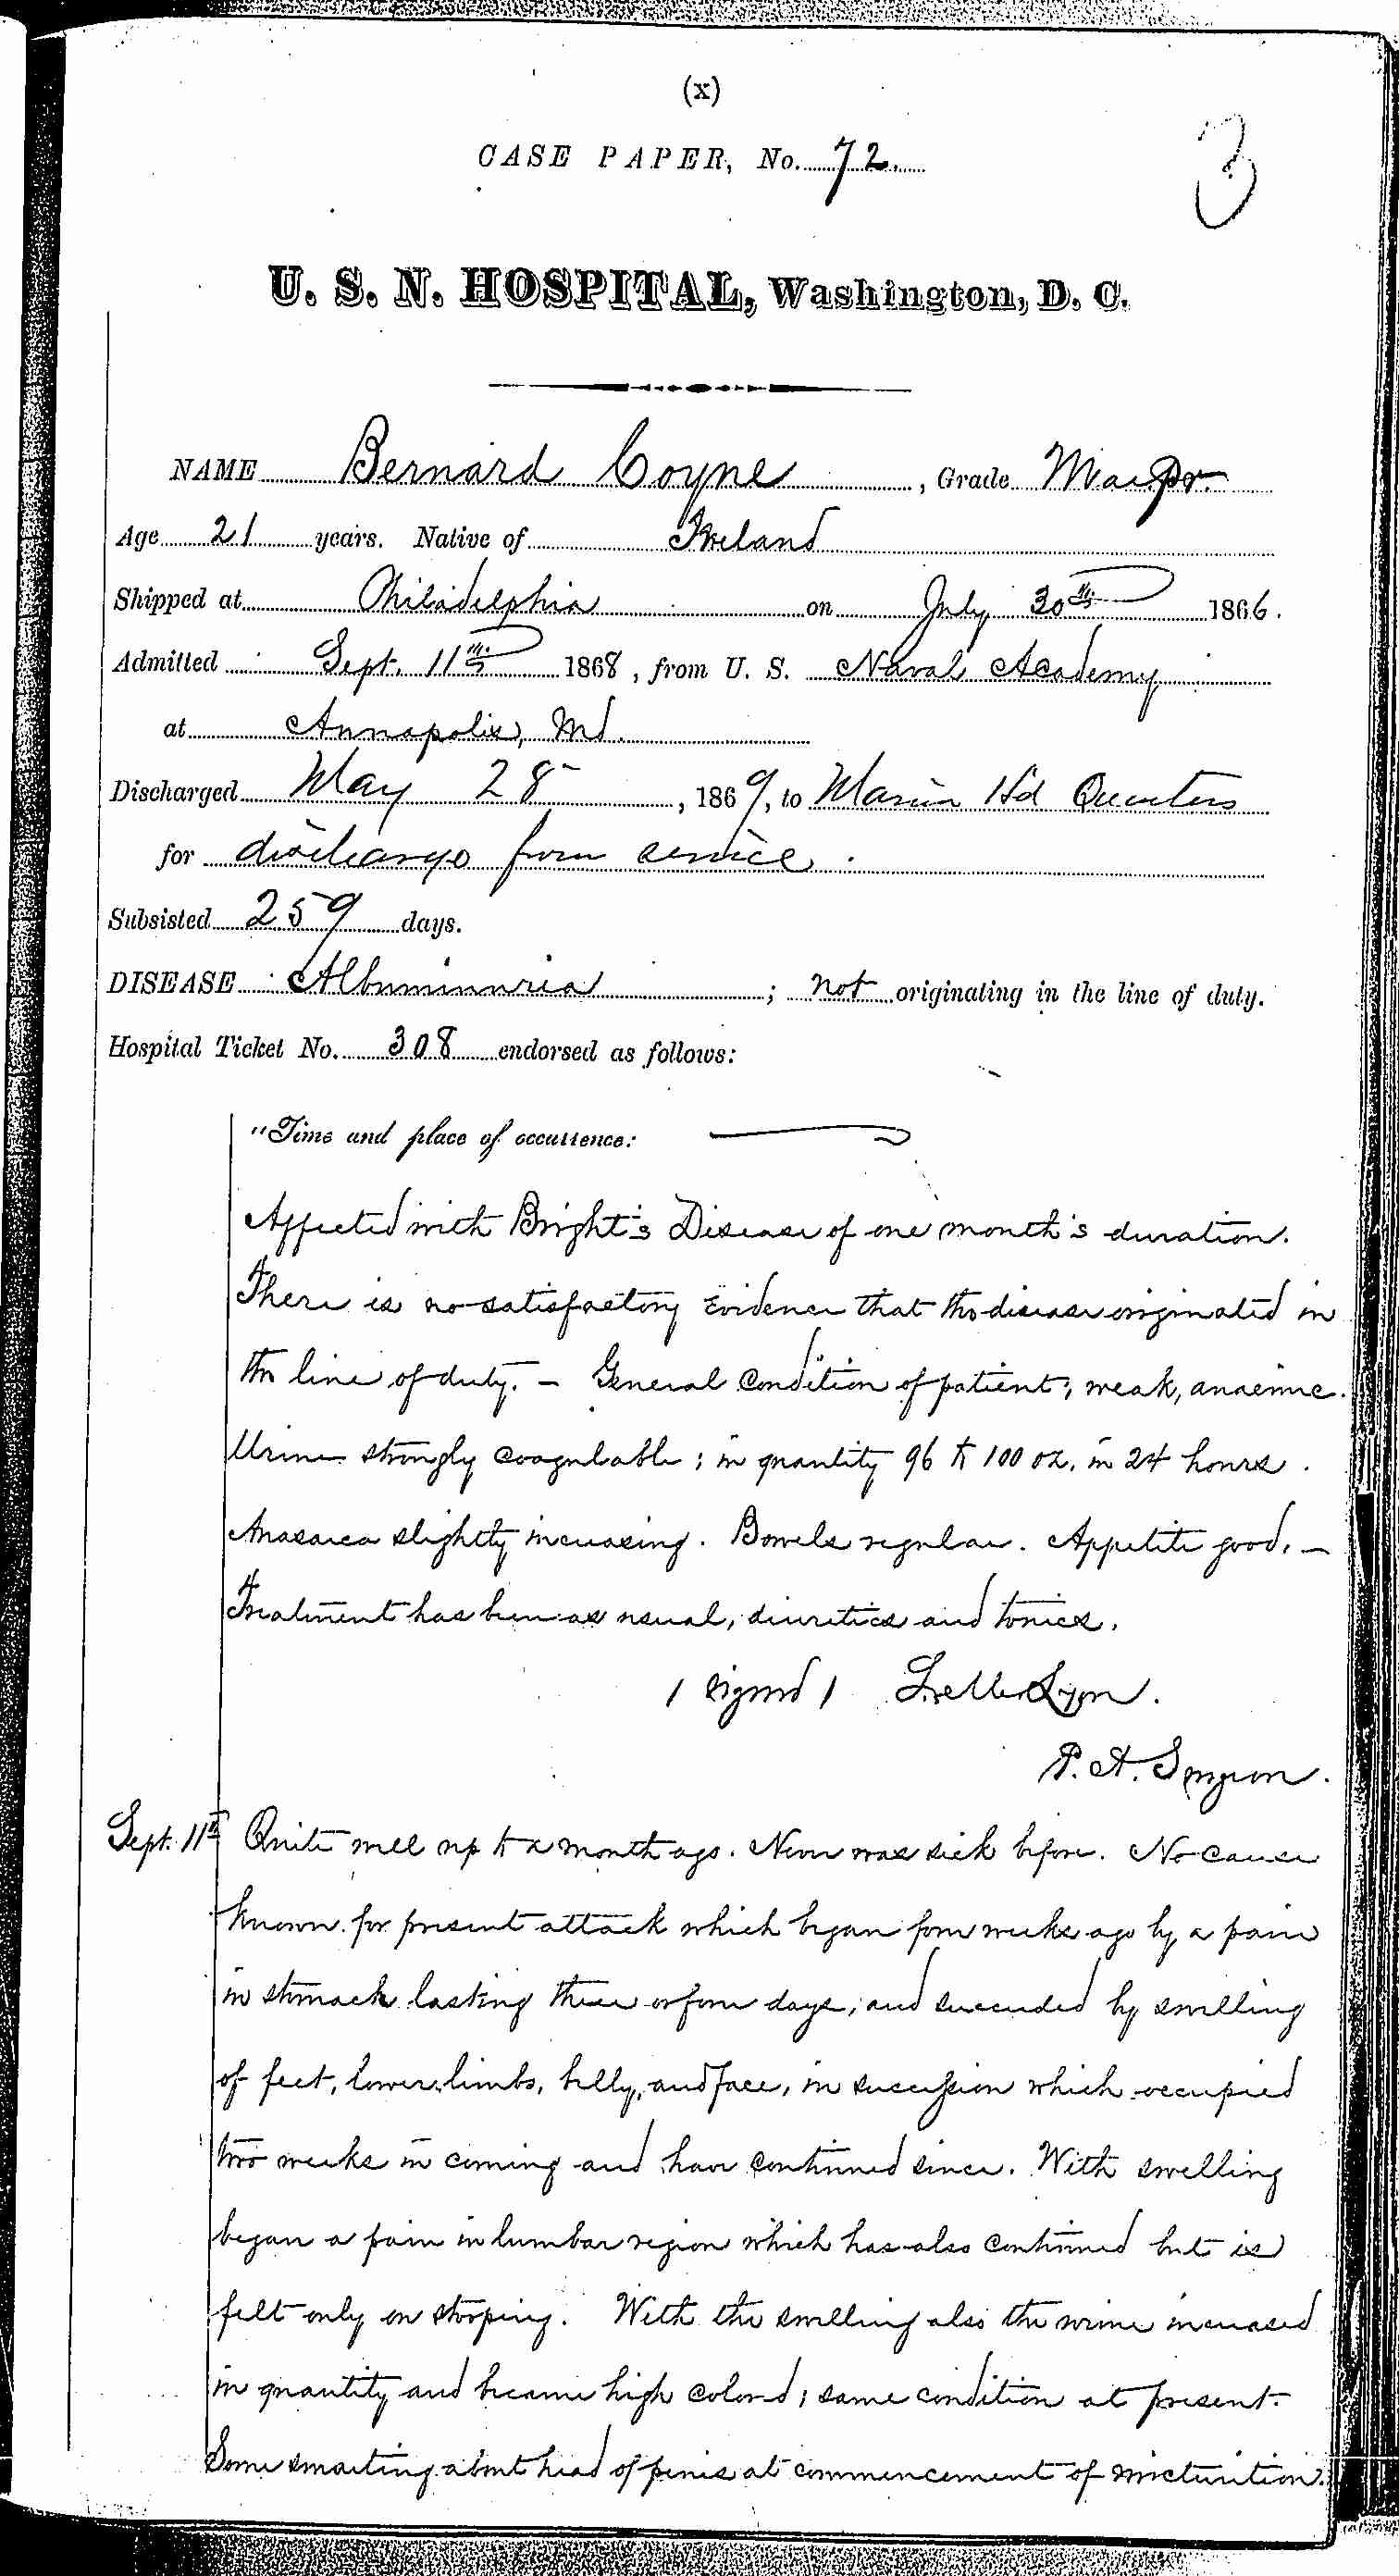 Entry for Bernard Coyne (page 1 of 13) in the log Hospital Tickets and Case Papers - Naval Hospital - Washington, D.C. - 1868-69